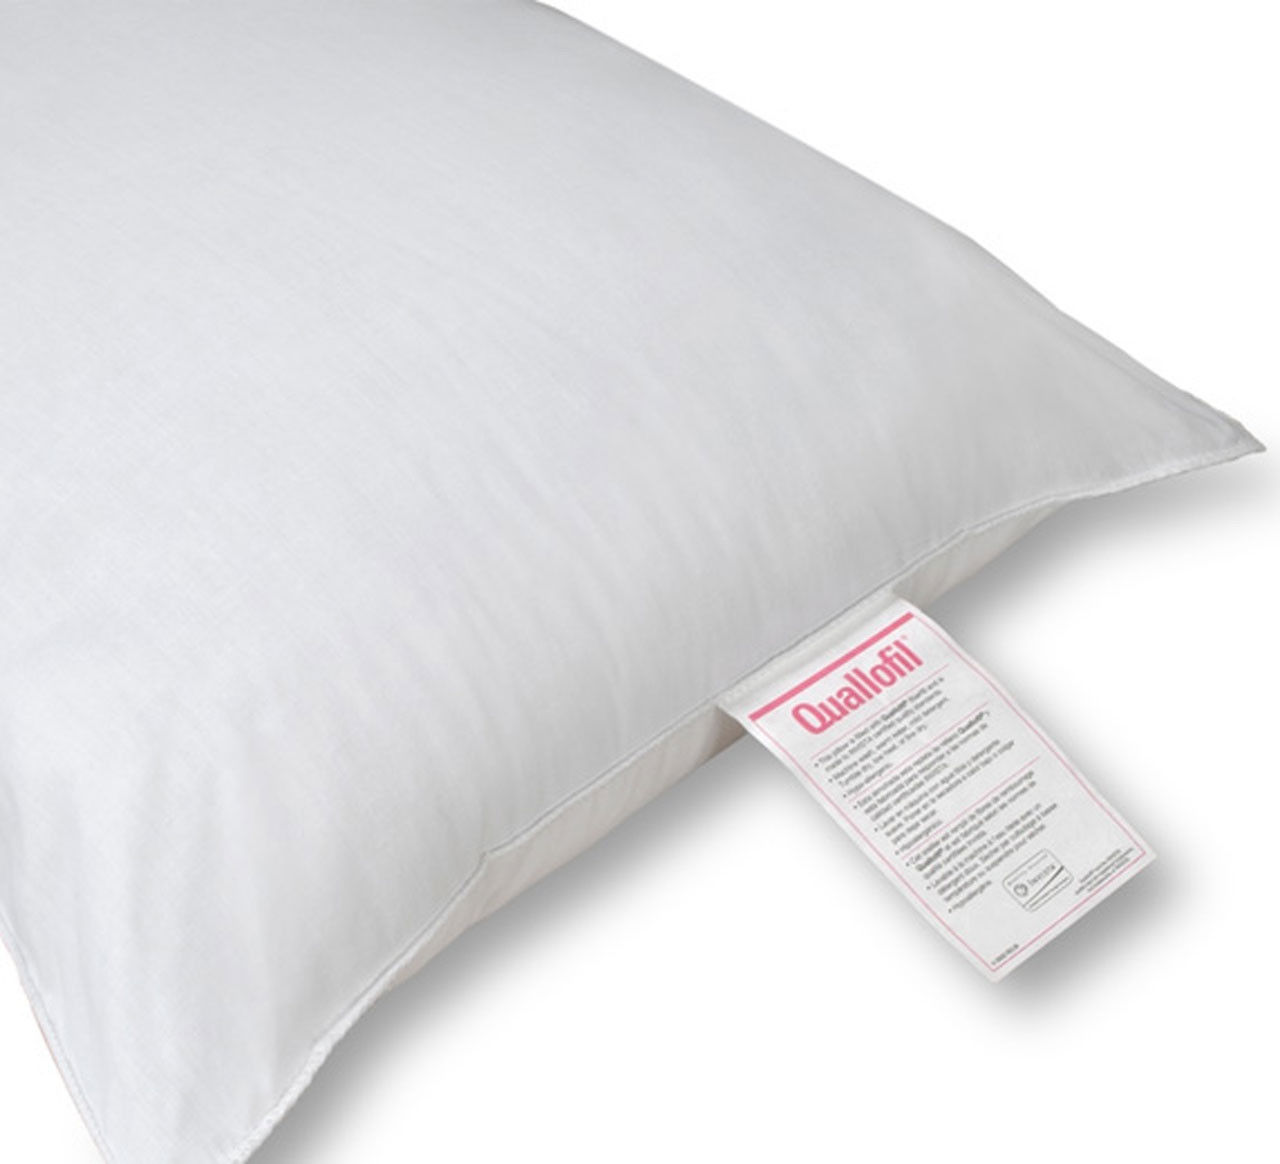 What is the design structure of the Quallofil II Pillow?